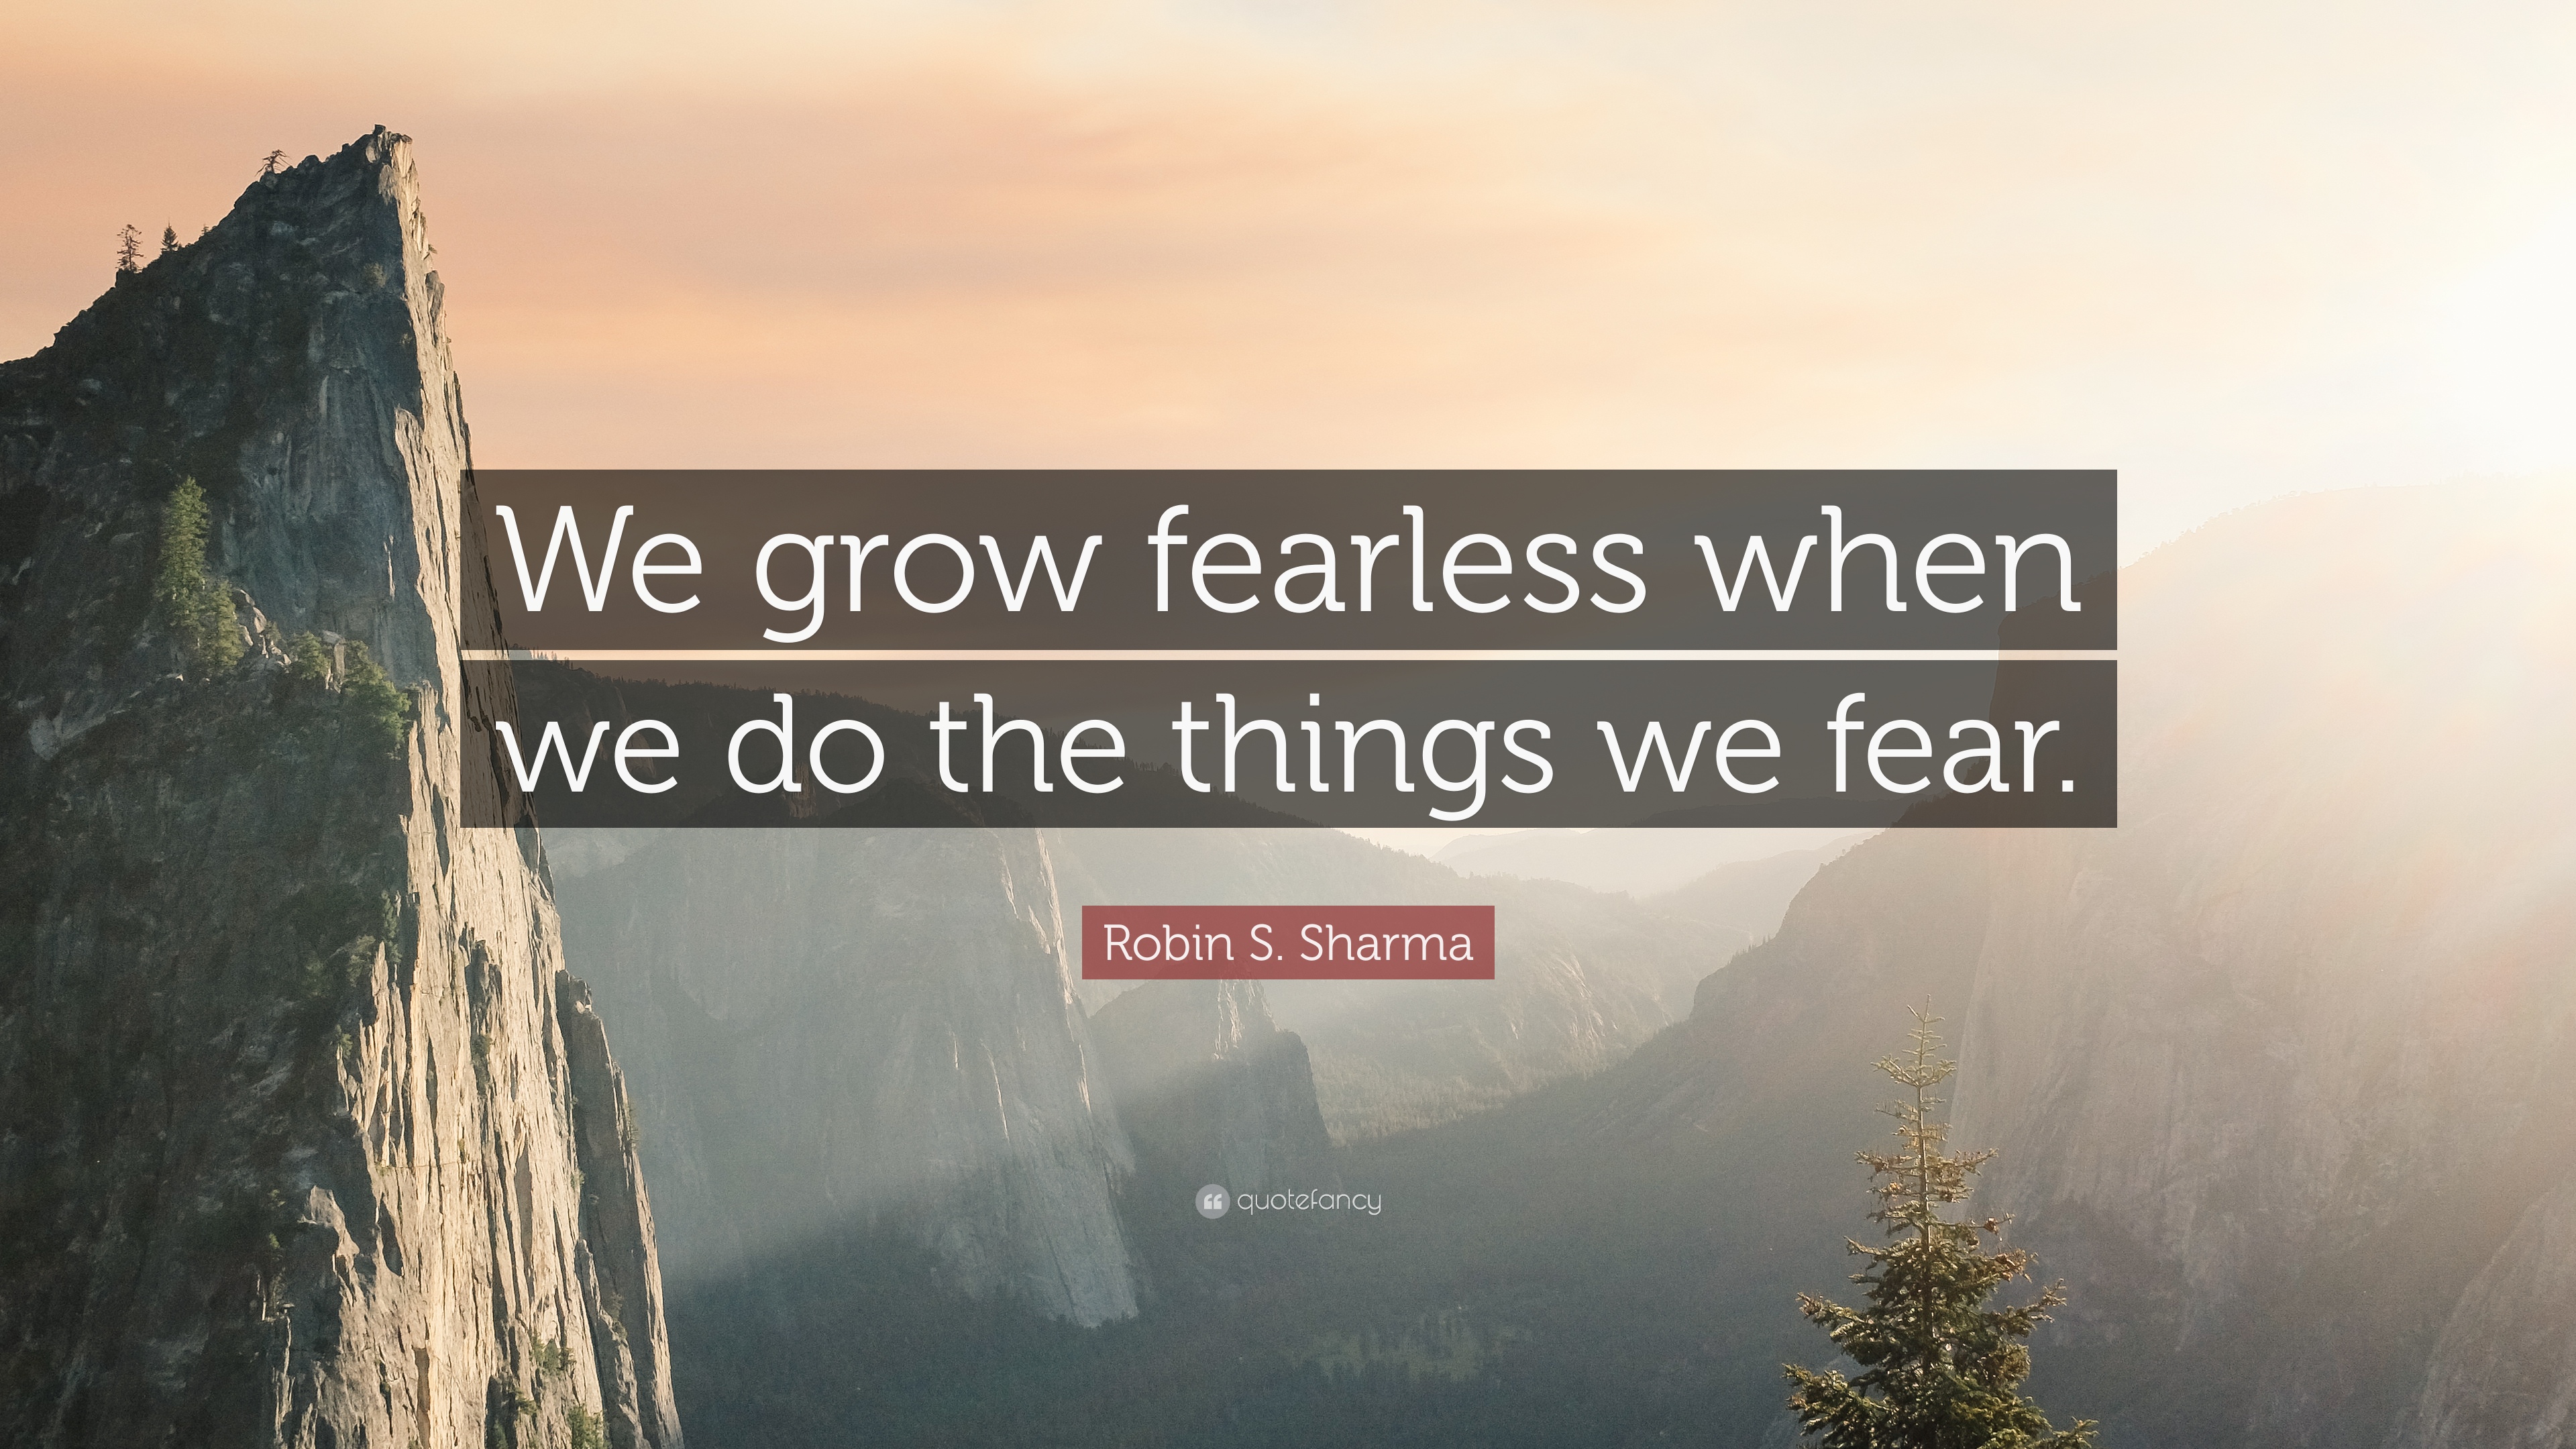 Robin S. Sharma Quote We grow fearless when we do the things we